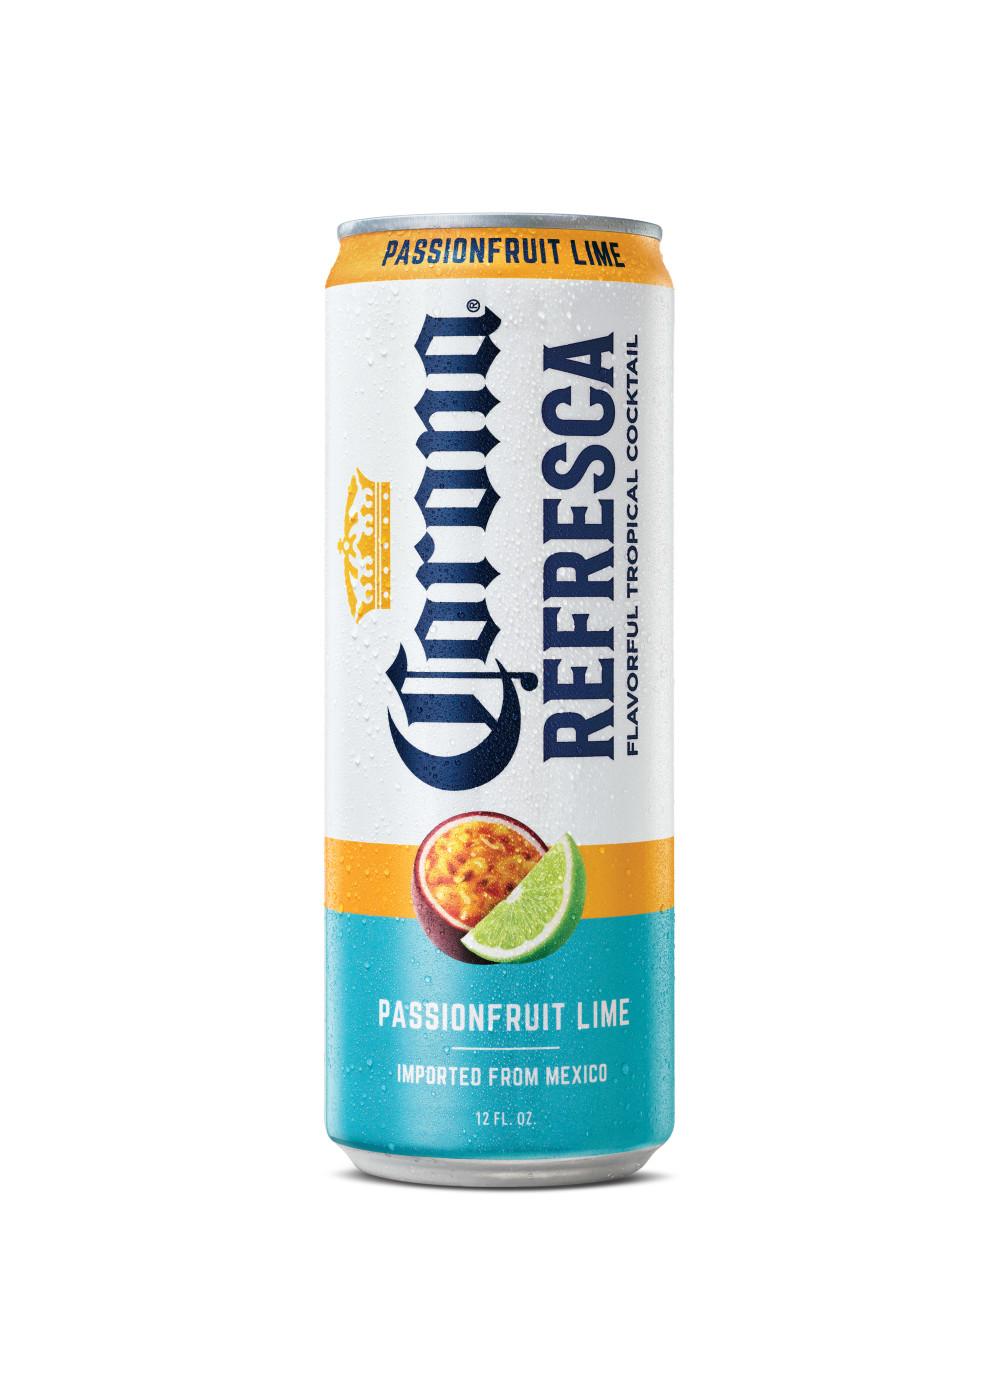 Corona Refresca Passionfruit Lime Spiked Tropical Cocktail 6 pk Cans; image 3 of 3